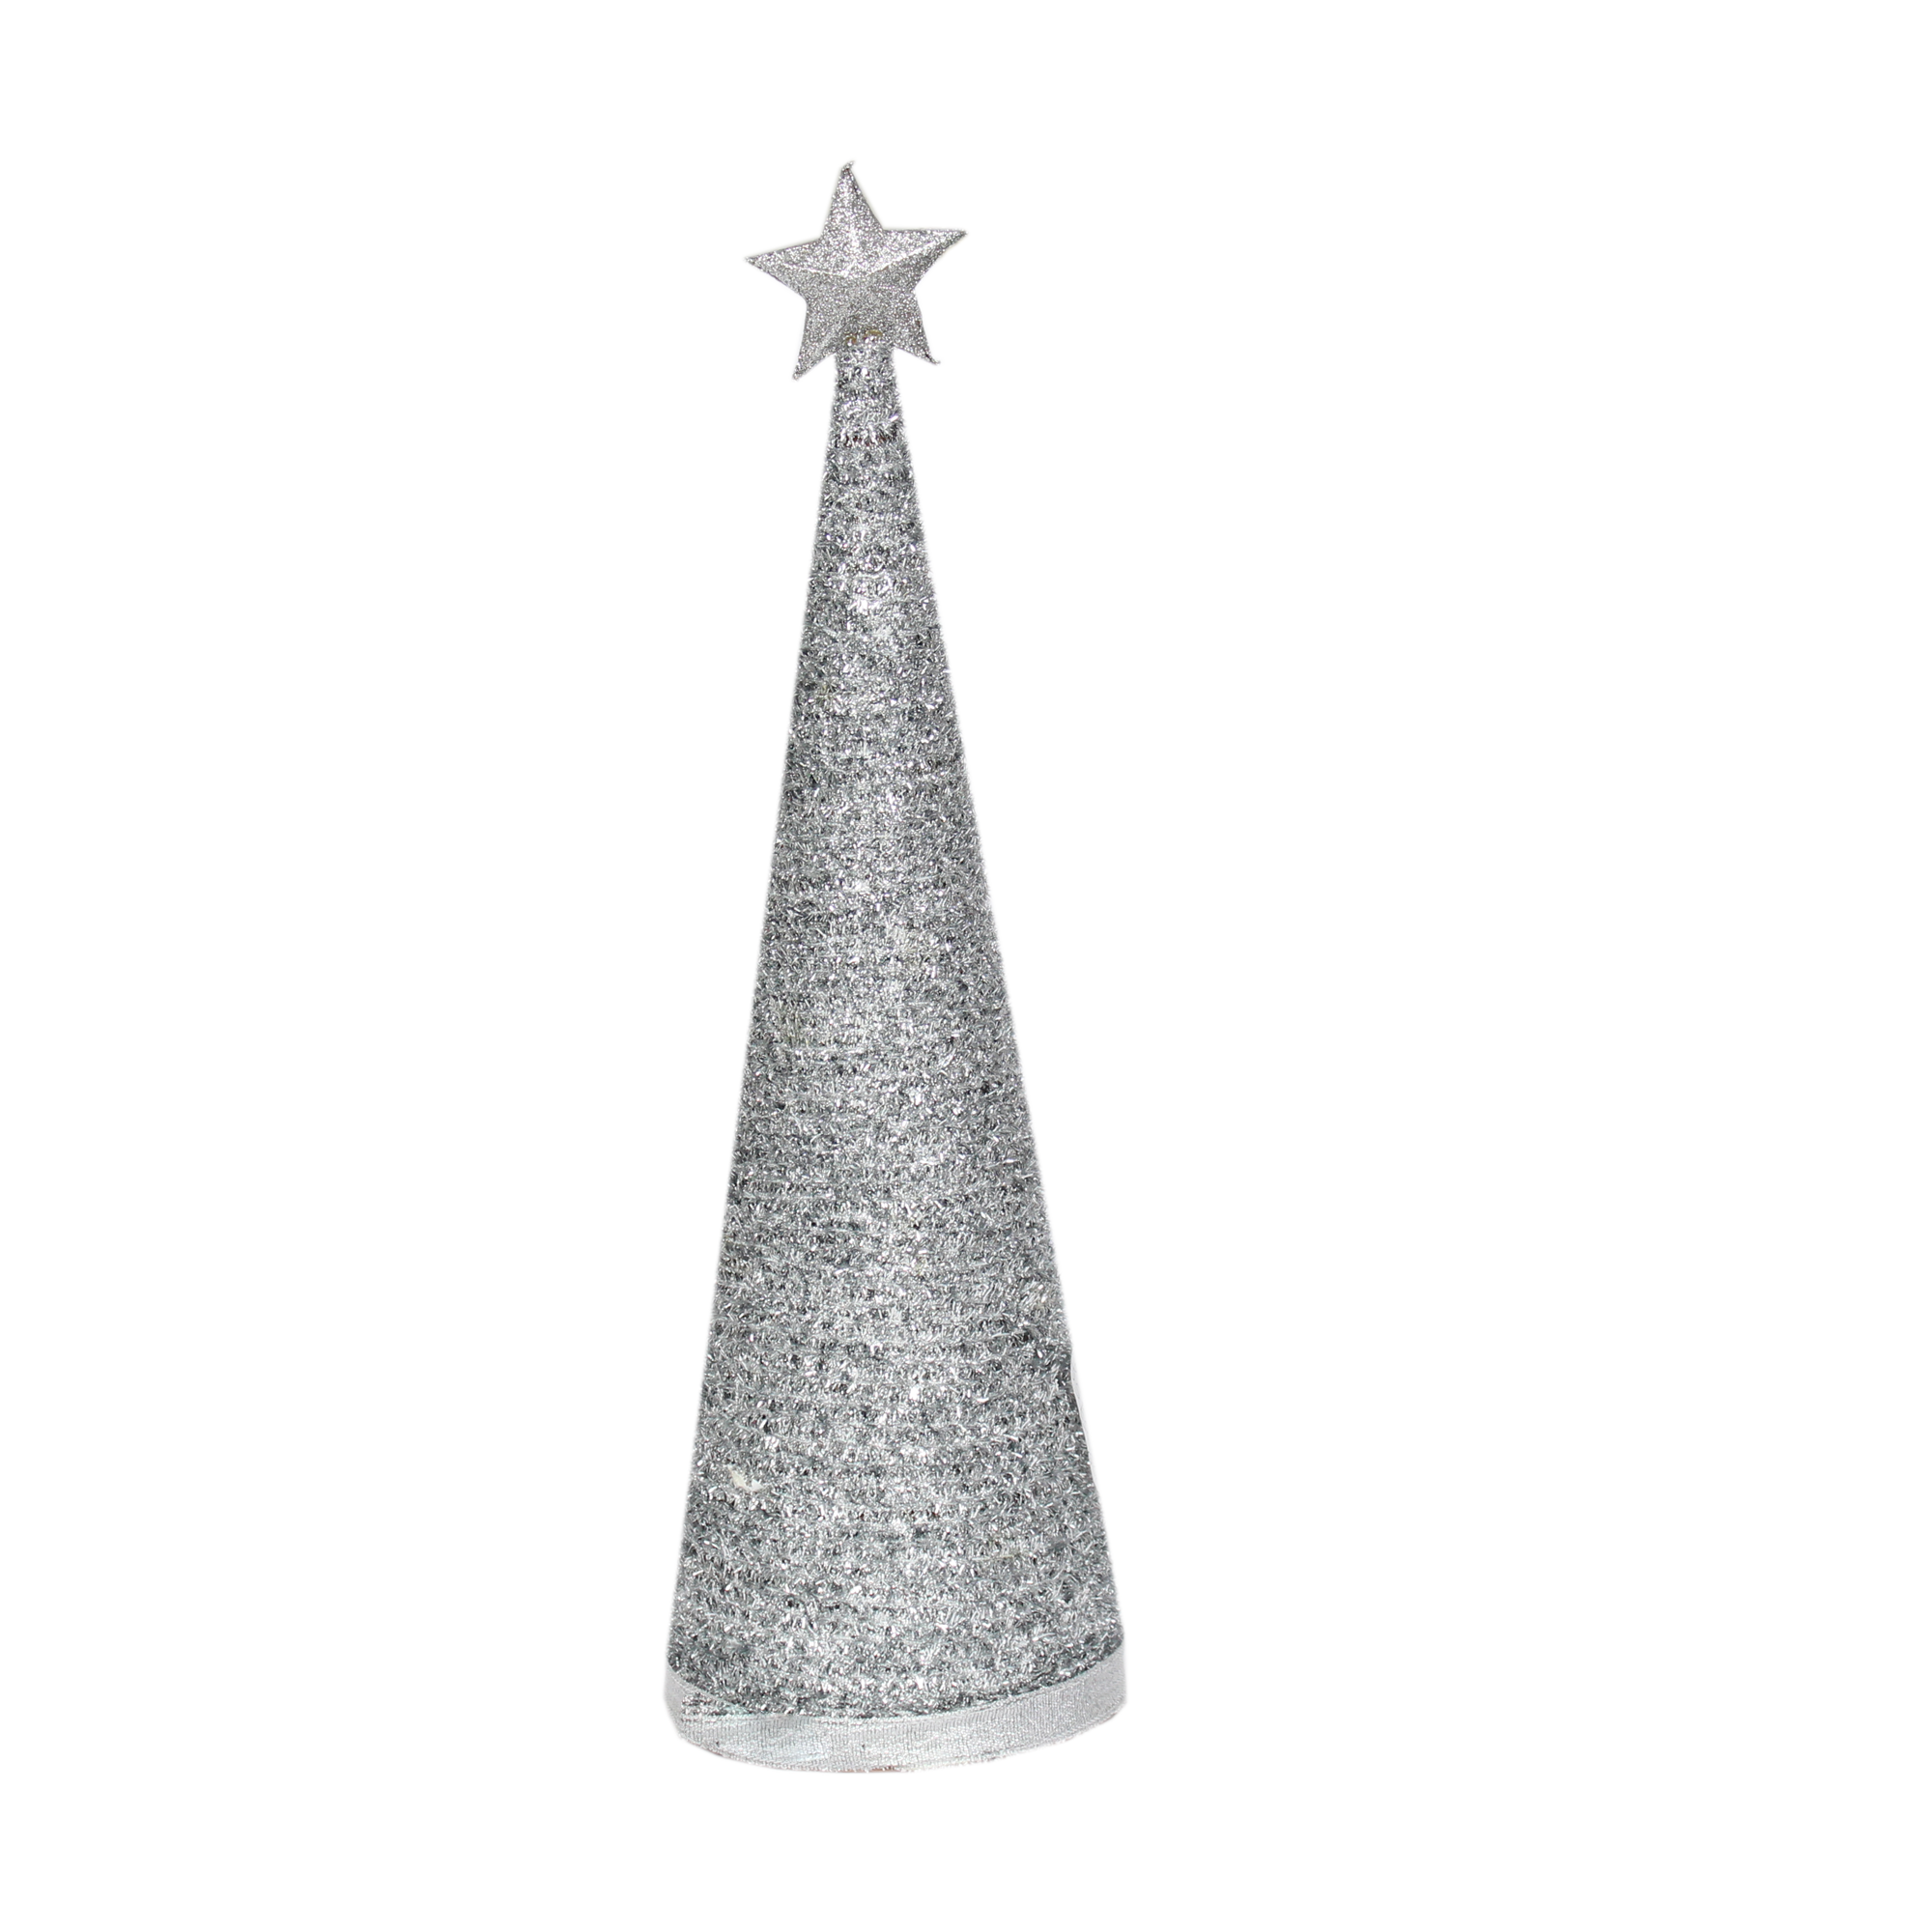 Handmade Conical Christmas Tinsel Tree with Sequins and Star - 14.5 X 4inch, Silver, 1pc